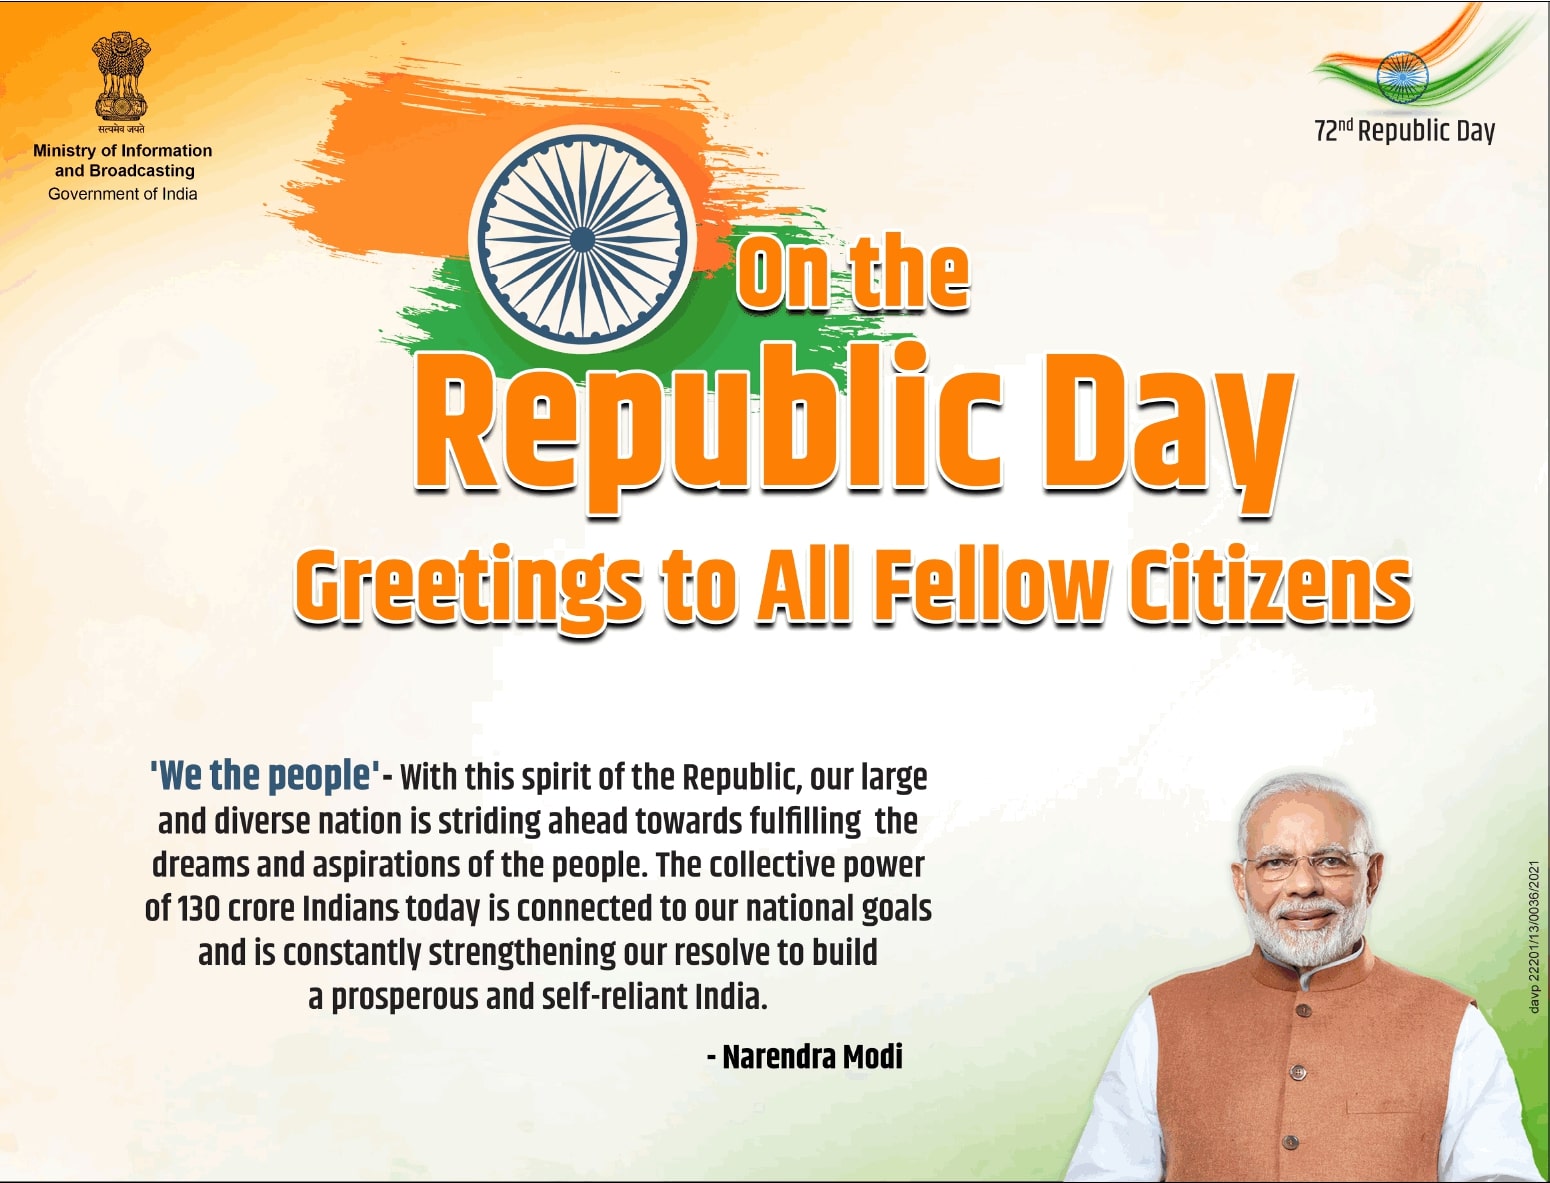 ministry-of-information-and-boardcasting-on-the-republic-day-greeting-to-all-fellow-citizens-ad-times-of-india-mumbai-26-01-2021